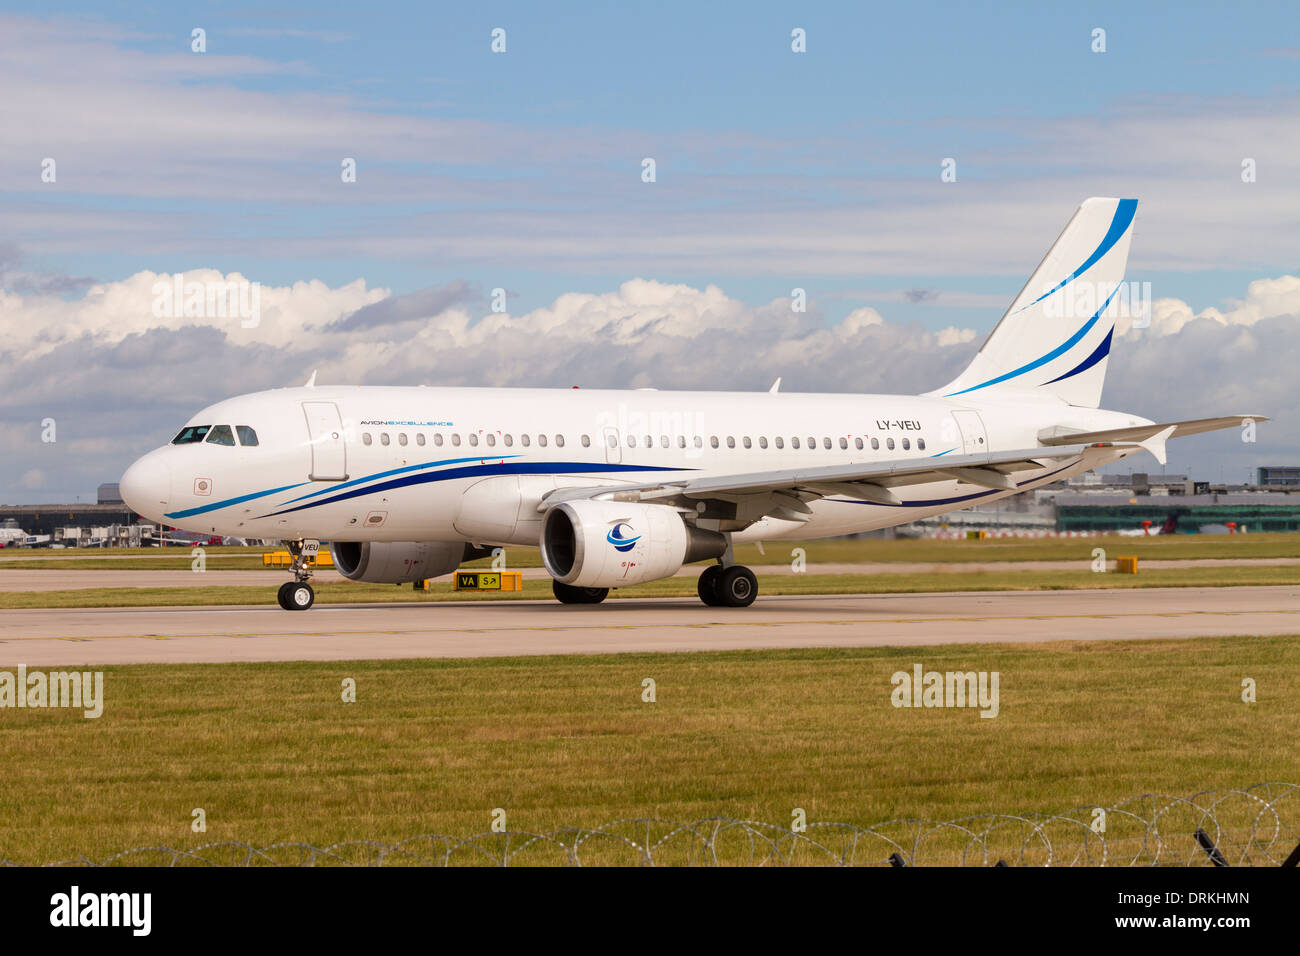 Avion Excellence airbus A319 on runway for take off at Manchester Airport Stock Photo